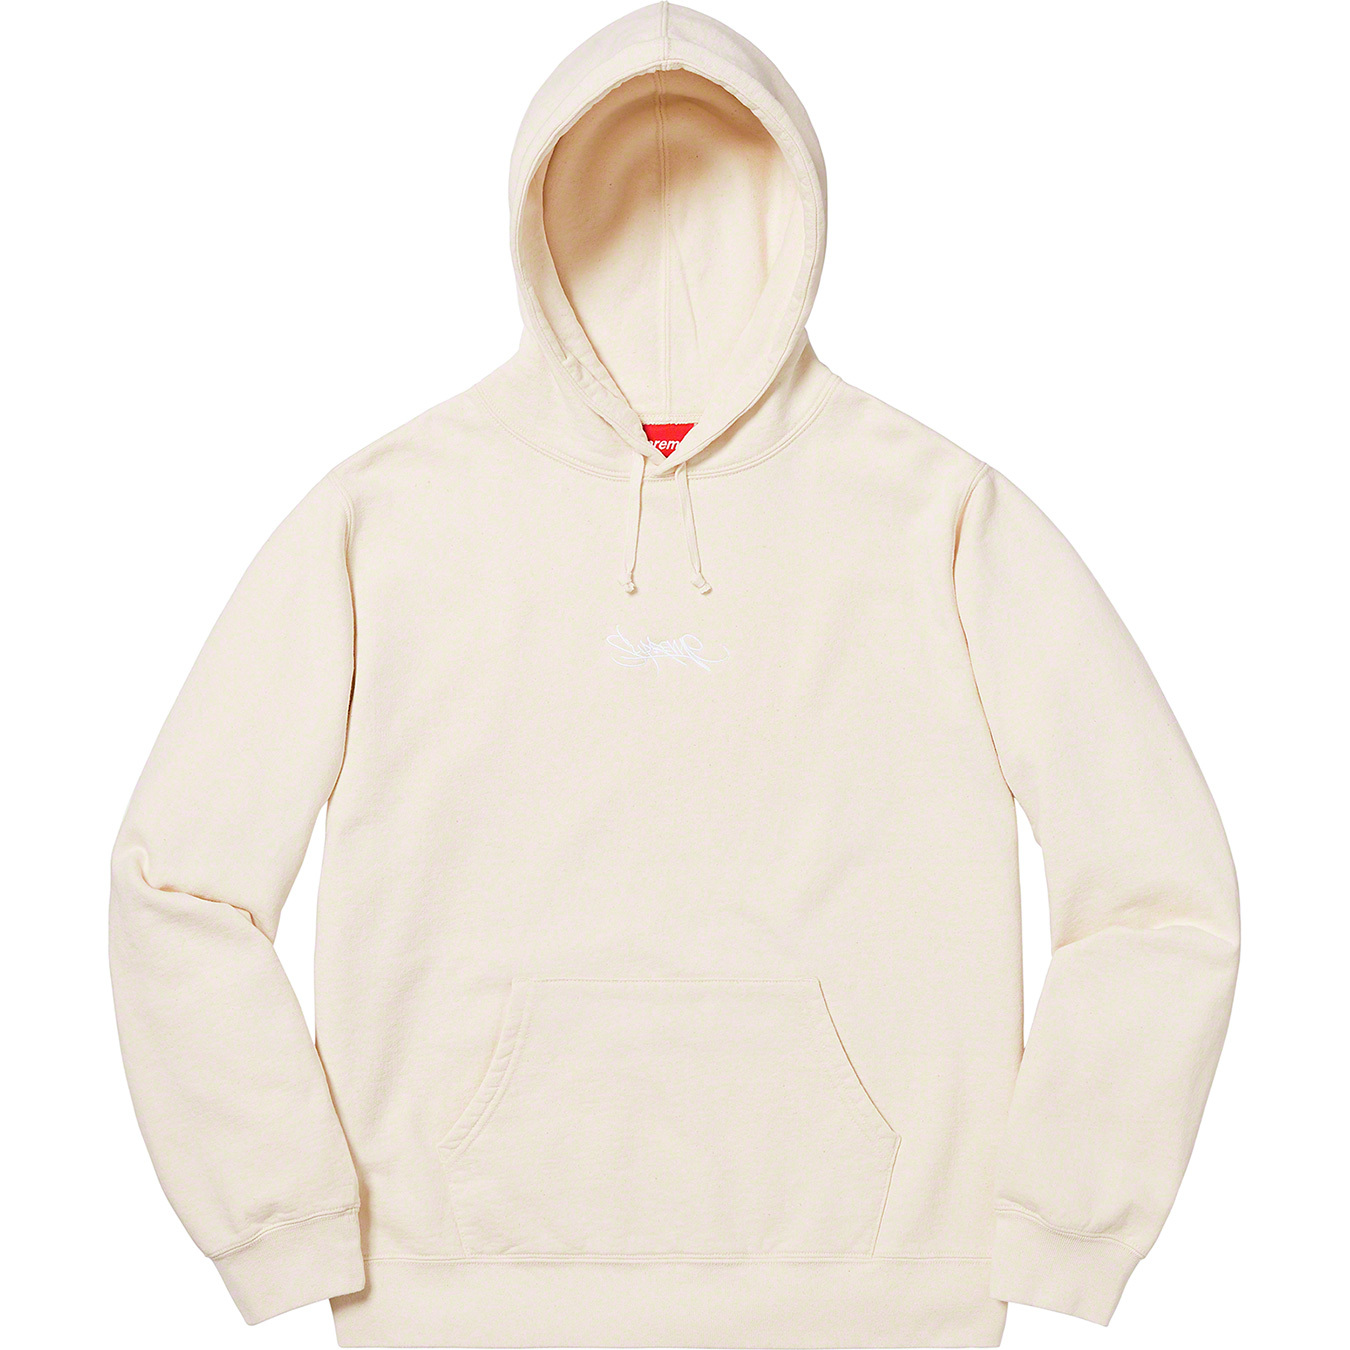 Supreme Louis Vuitton Today Hoodie - Tagotee